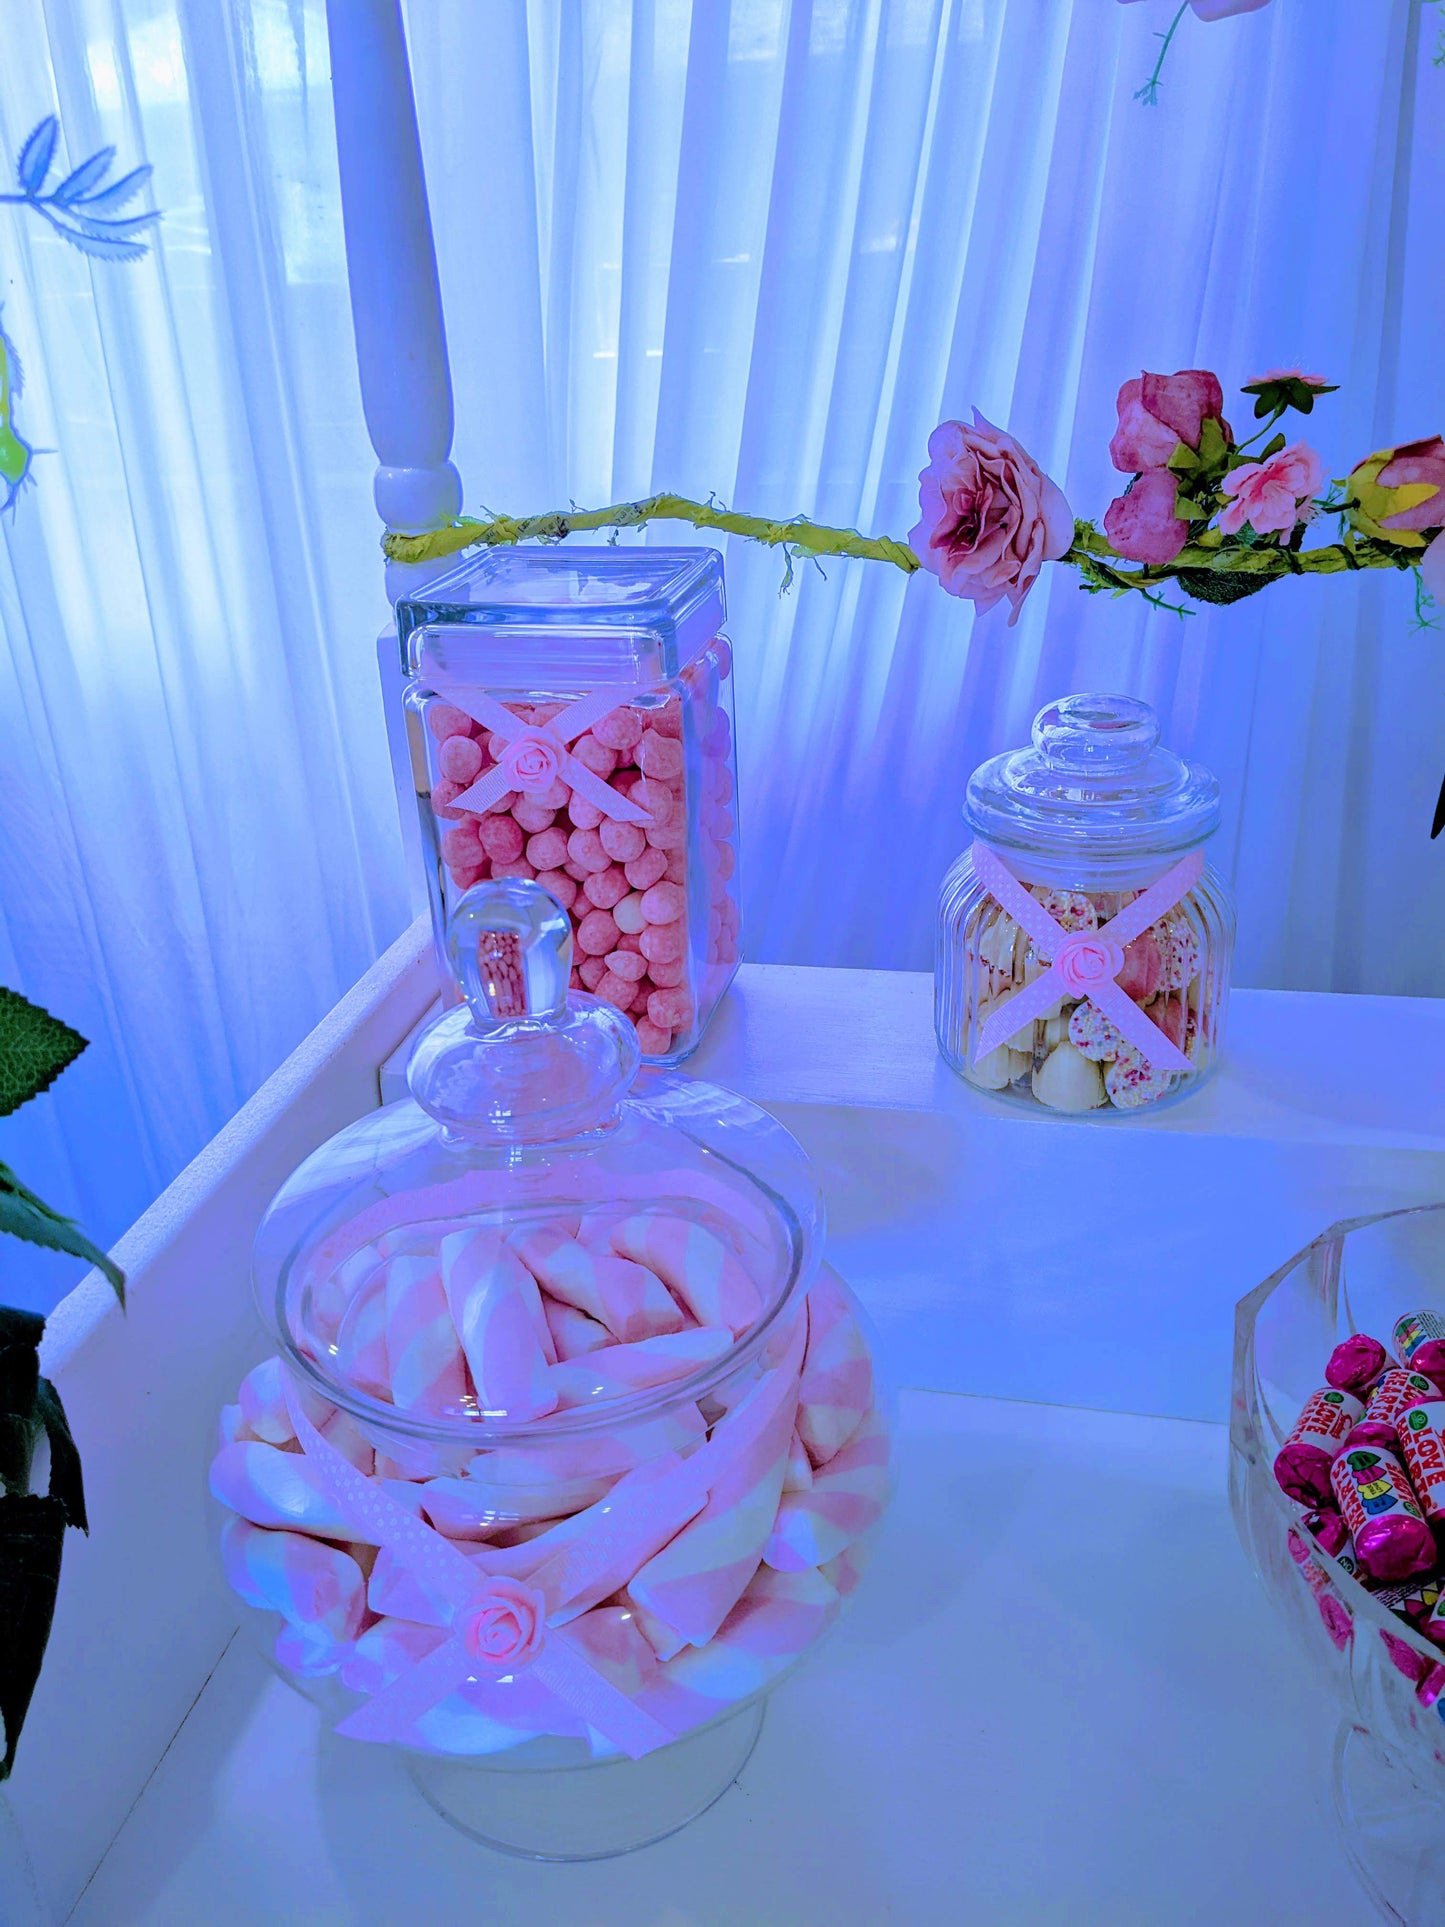 Traditional Sweet Cart Services for all Occasion